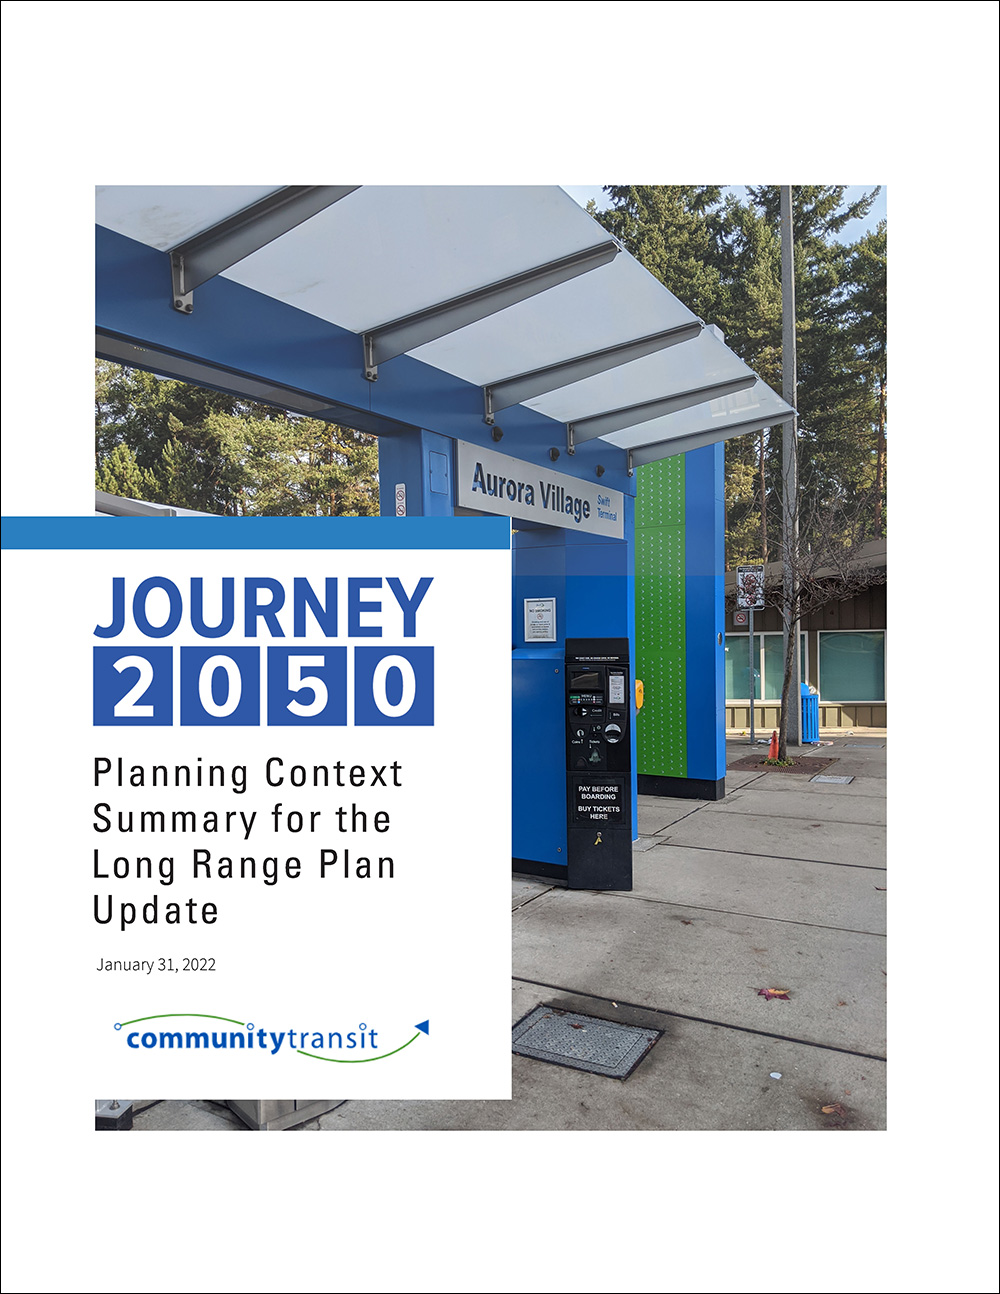 This is a picture of the cover for the Planning Context memo. It includes a picture of the Aurora Village Swift station.